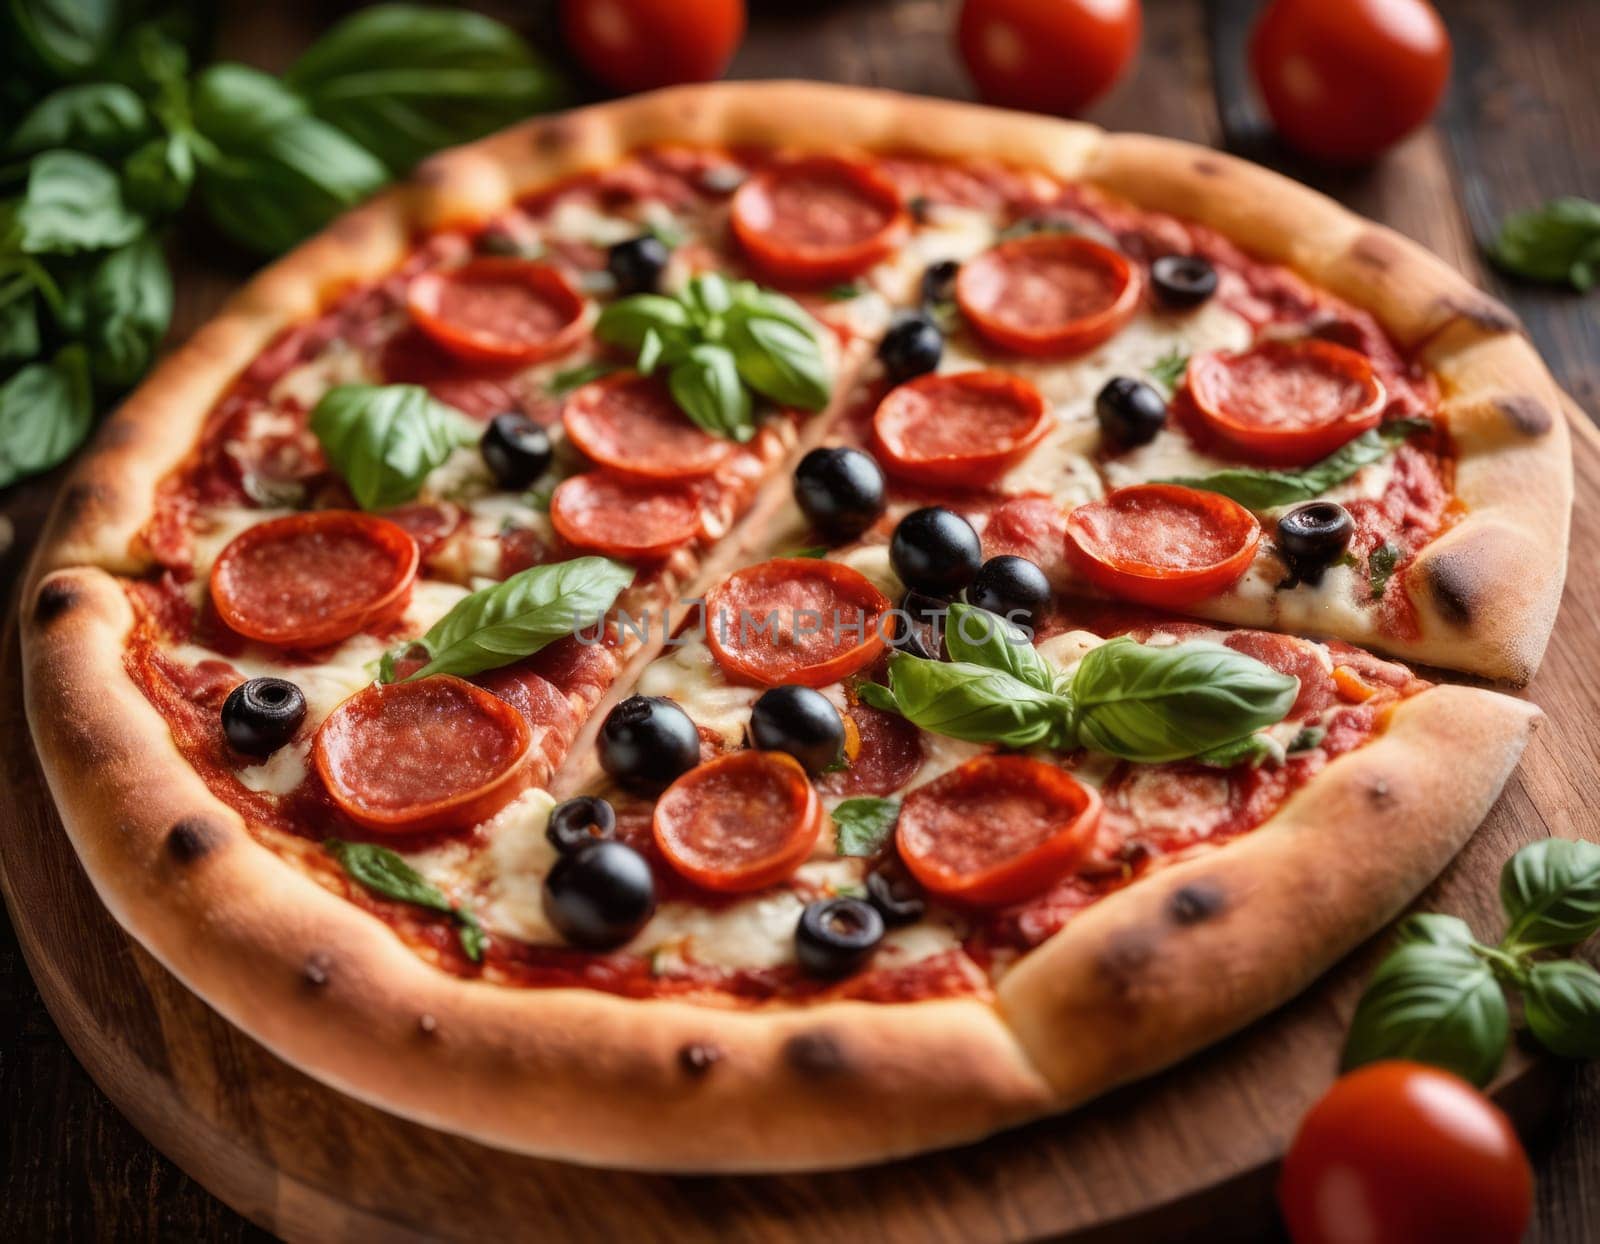 A mouth-watering image of a freshly baked pizza with a crispy crust, topped with melted cheese, pepperoni slices, black olives and fresh basil leaves, placed on a wooden surface